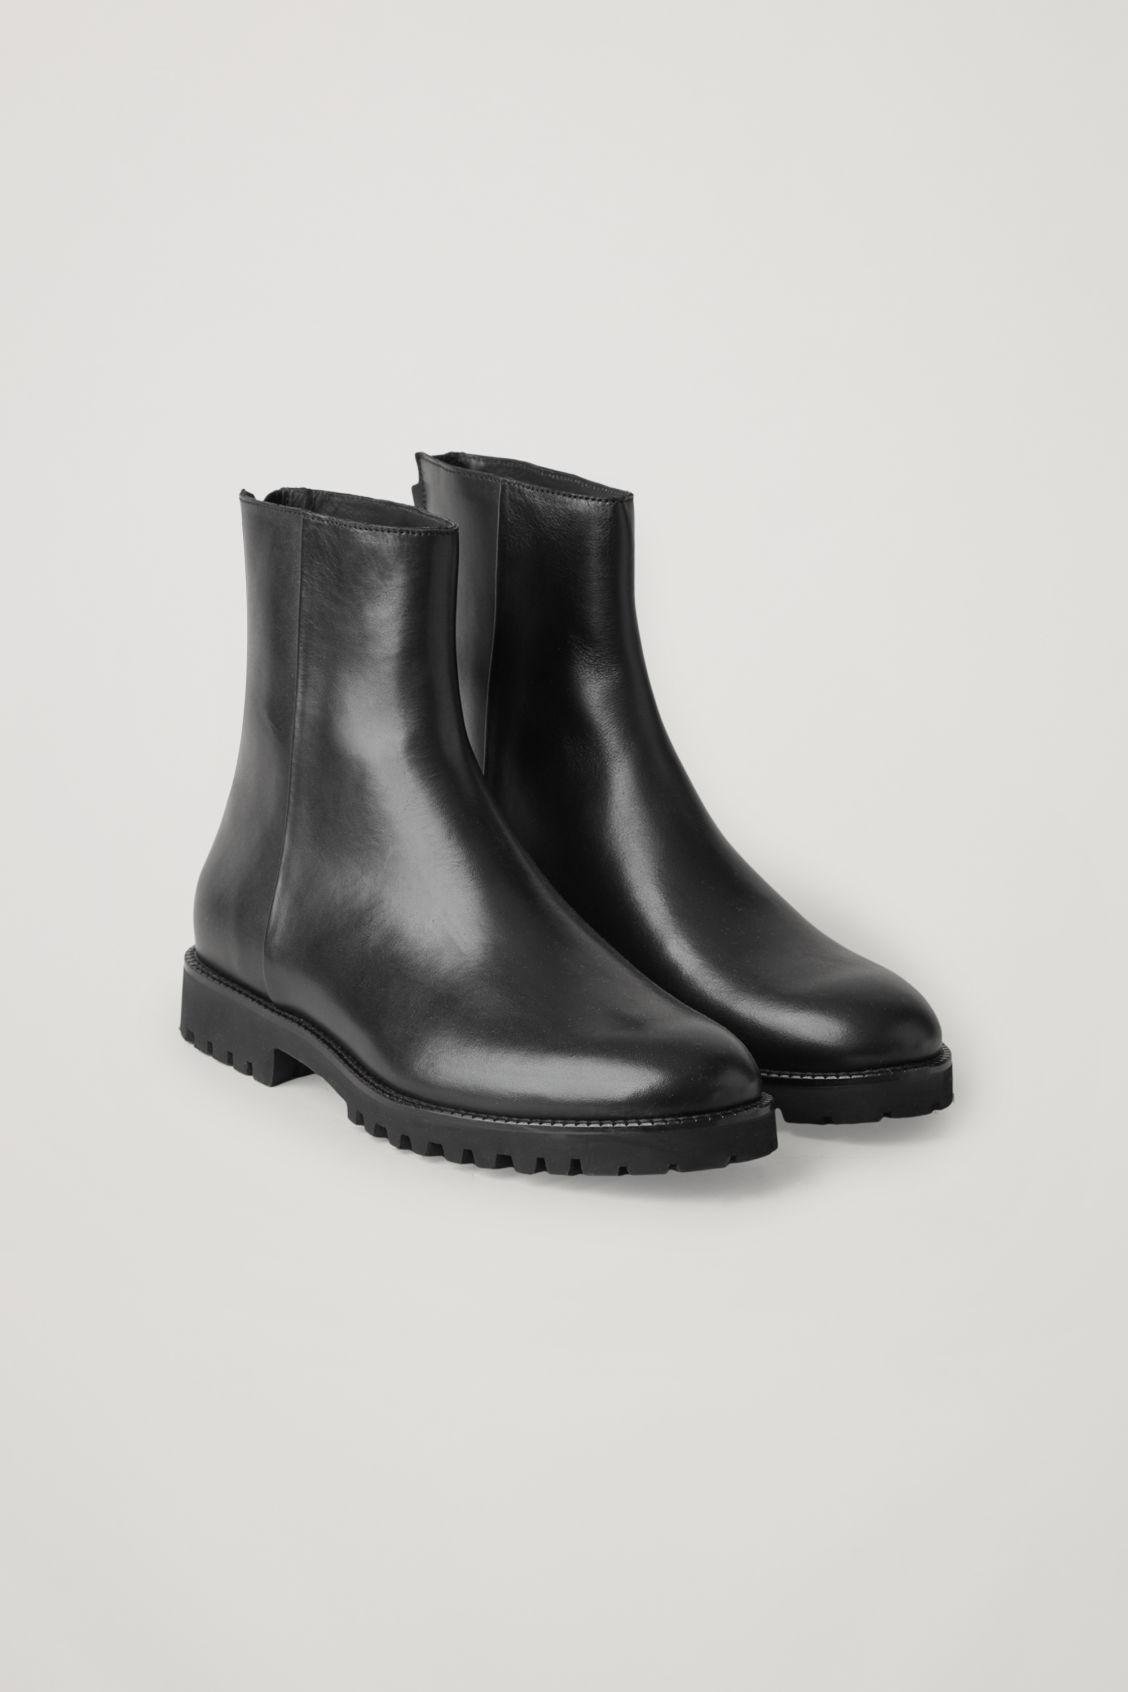 COS Leather Boots in Black for Men | Lyst